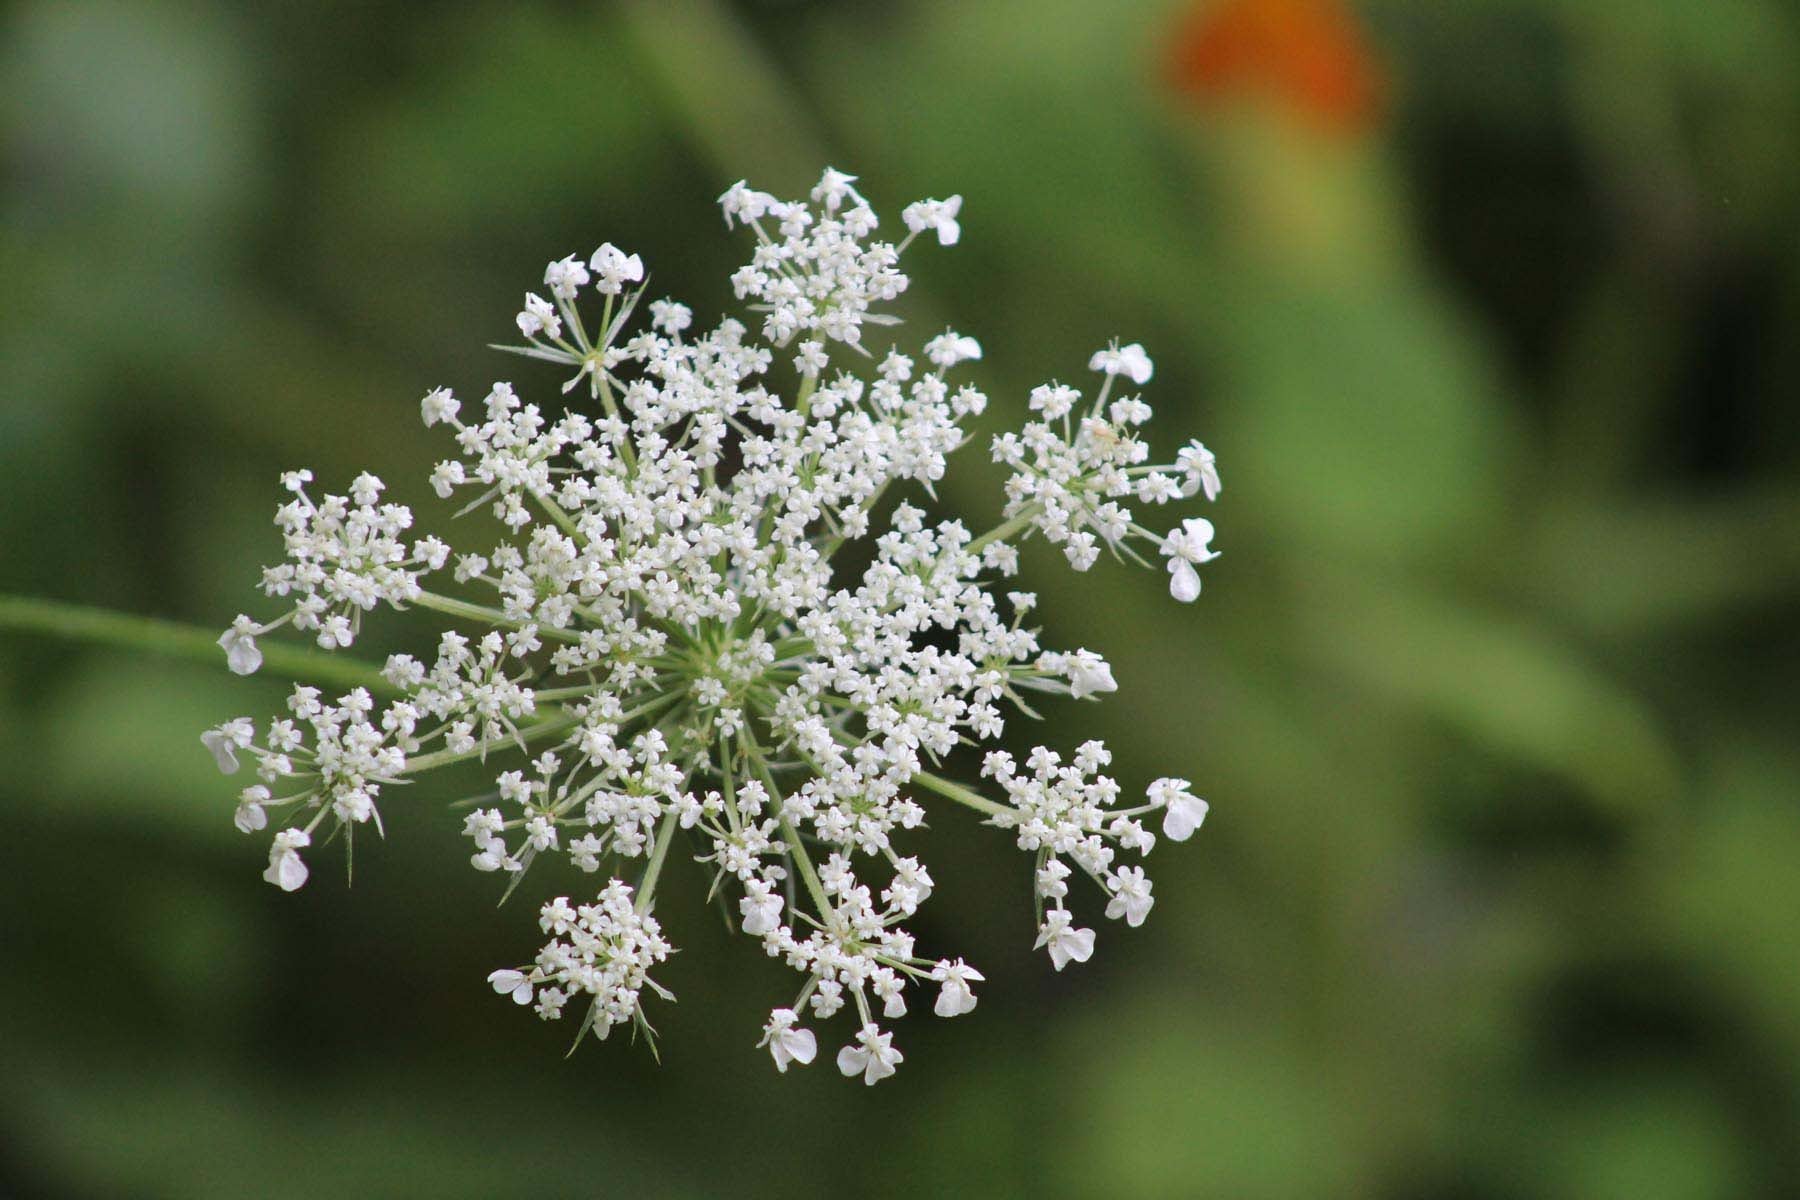 Queen Anne's Lace - How to Use Foraged Wild Carrots